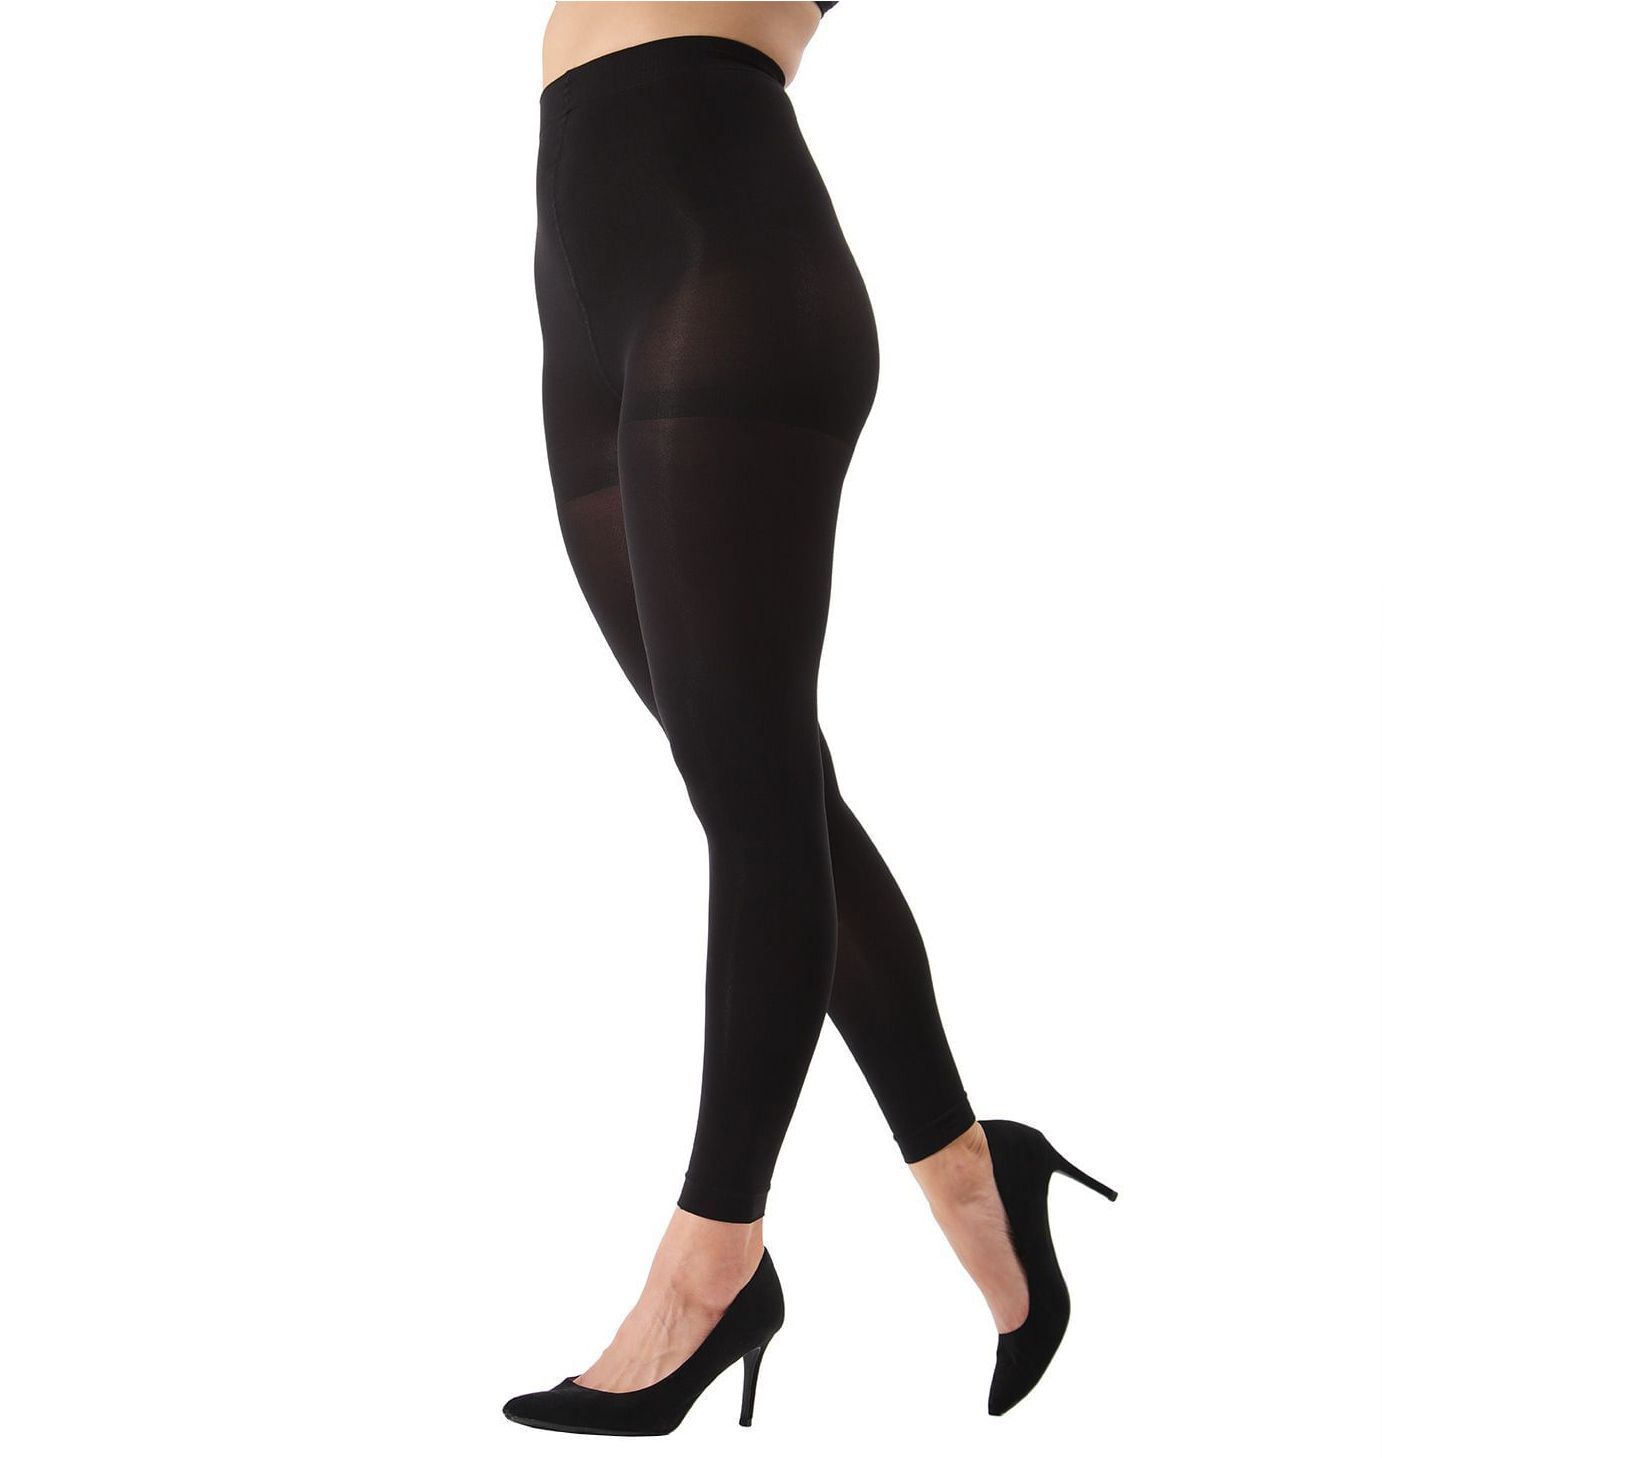 Perfectly Opaque Control Top Tights